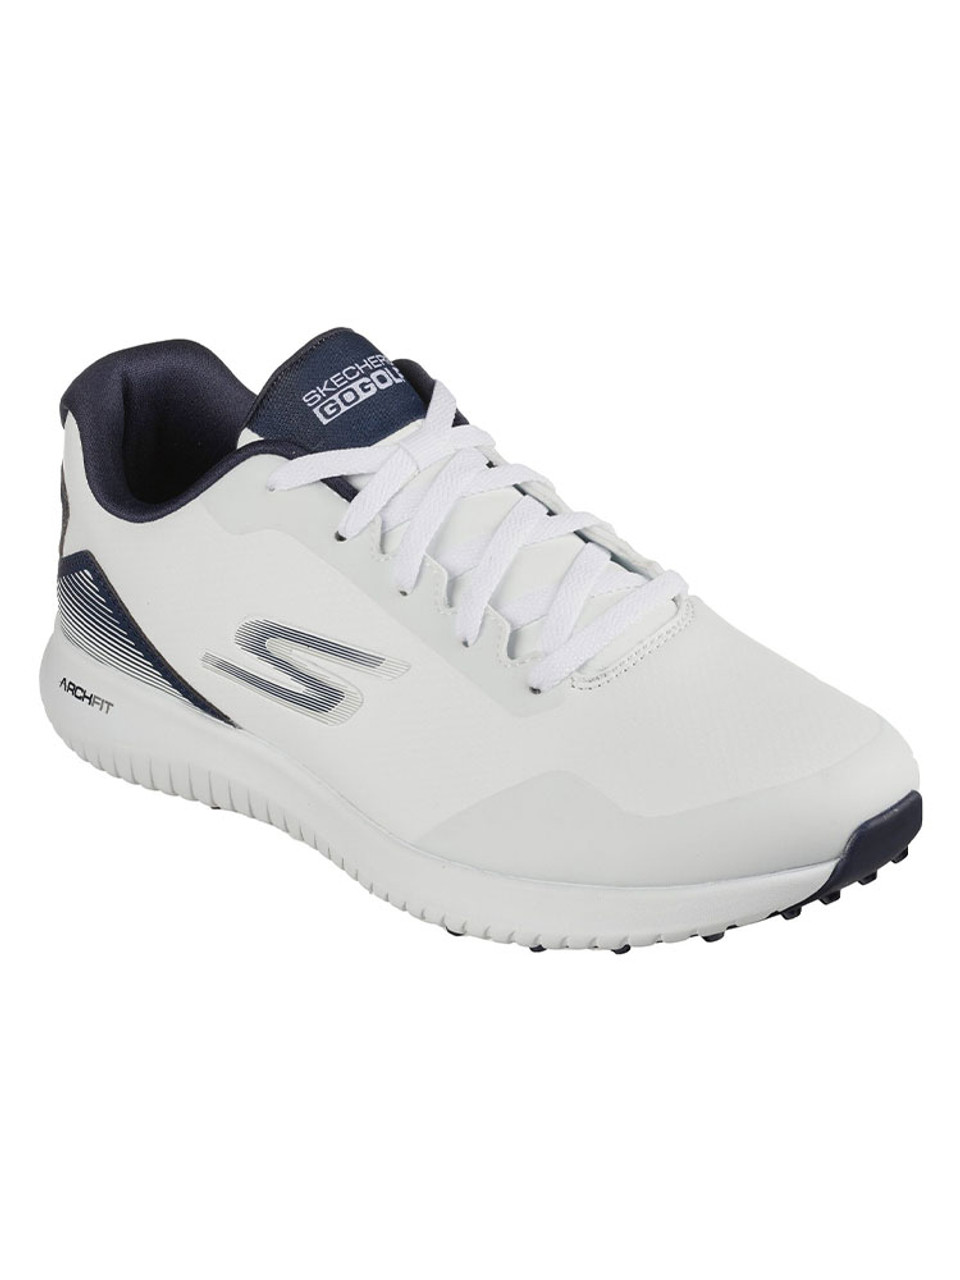 Skechers Arch Fit GO GOLF Max 2 Shoes - White/Navy - Mens | GolfBox